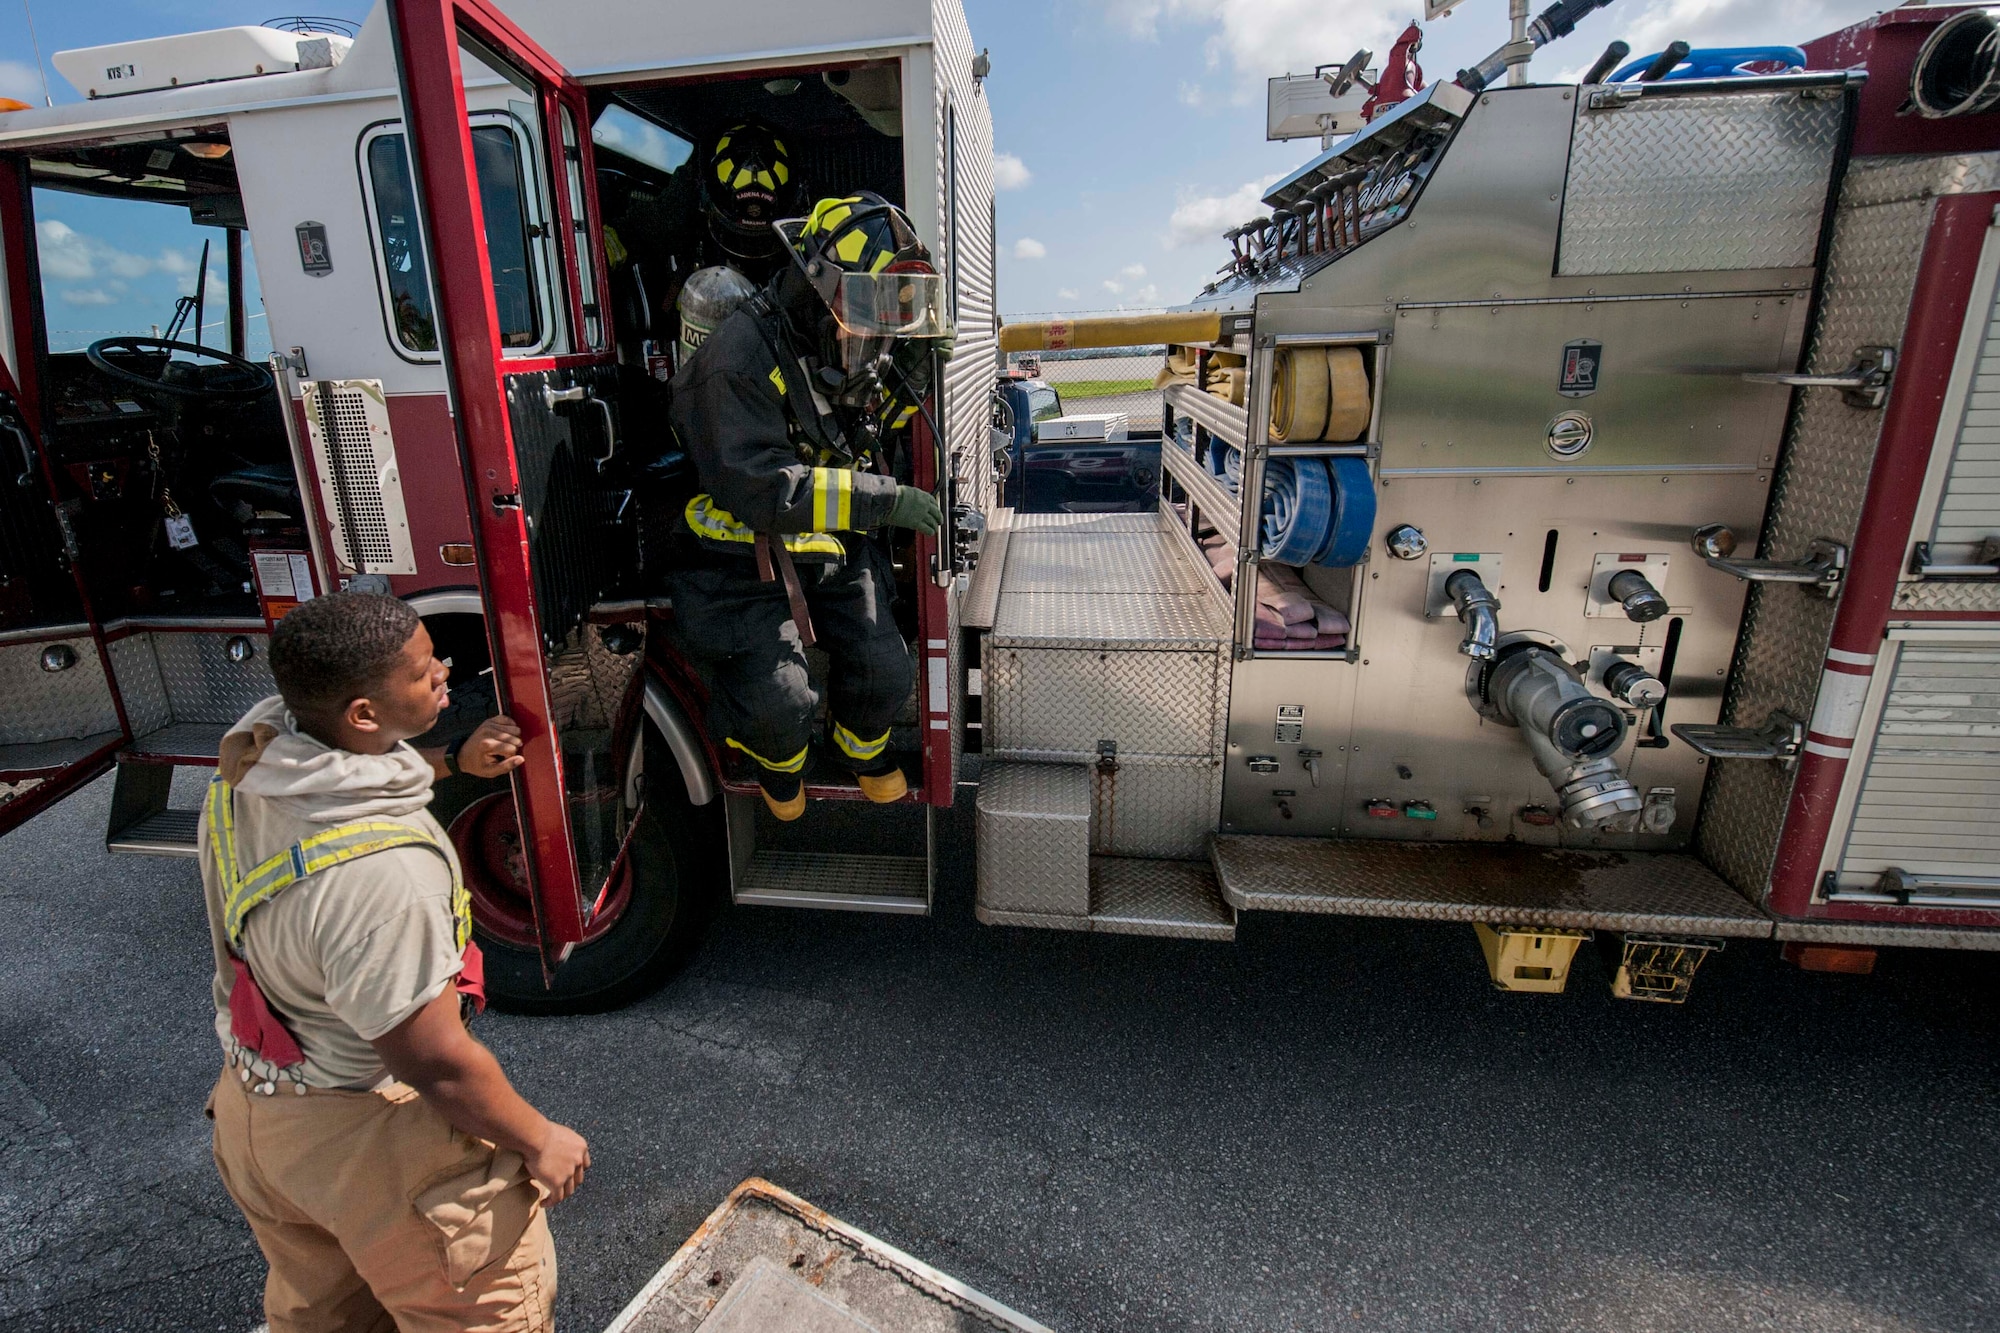 Firefighters from the 18th Civil Engineer Squadron exit a fire engine during a tower evacuation drill Aug. 15, 2016, at Kadena Air Base, Japan. Firefighters train on a regular basis in order to maintain constant readiness for emergencies. (U.S. Air Force photo by Senior Airman Peter Reft)